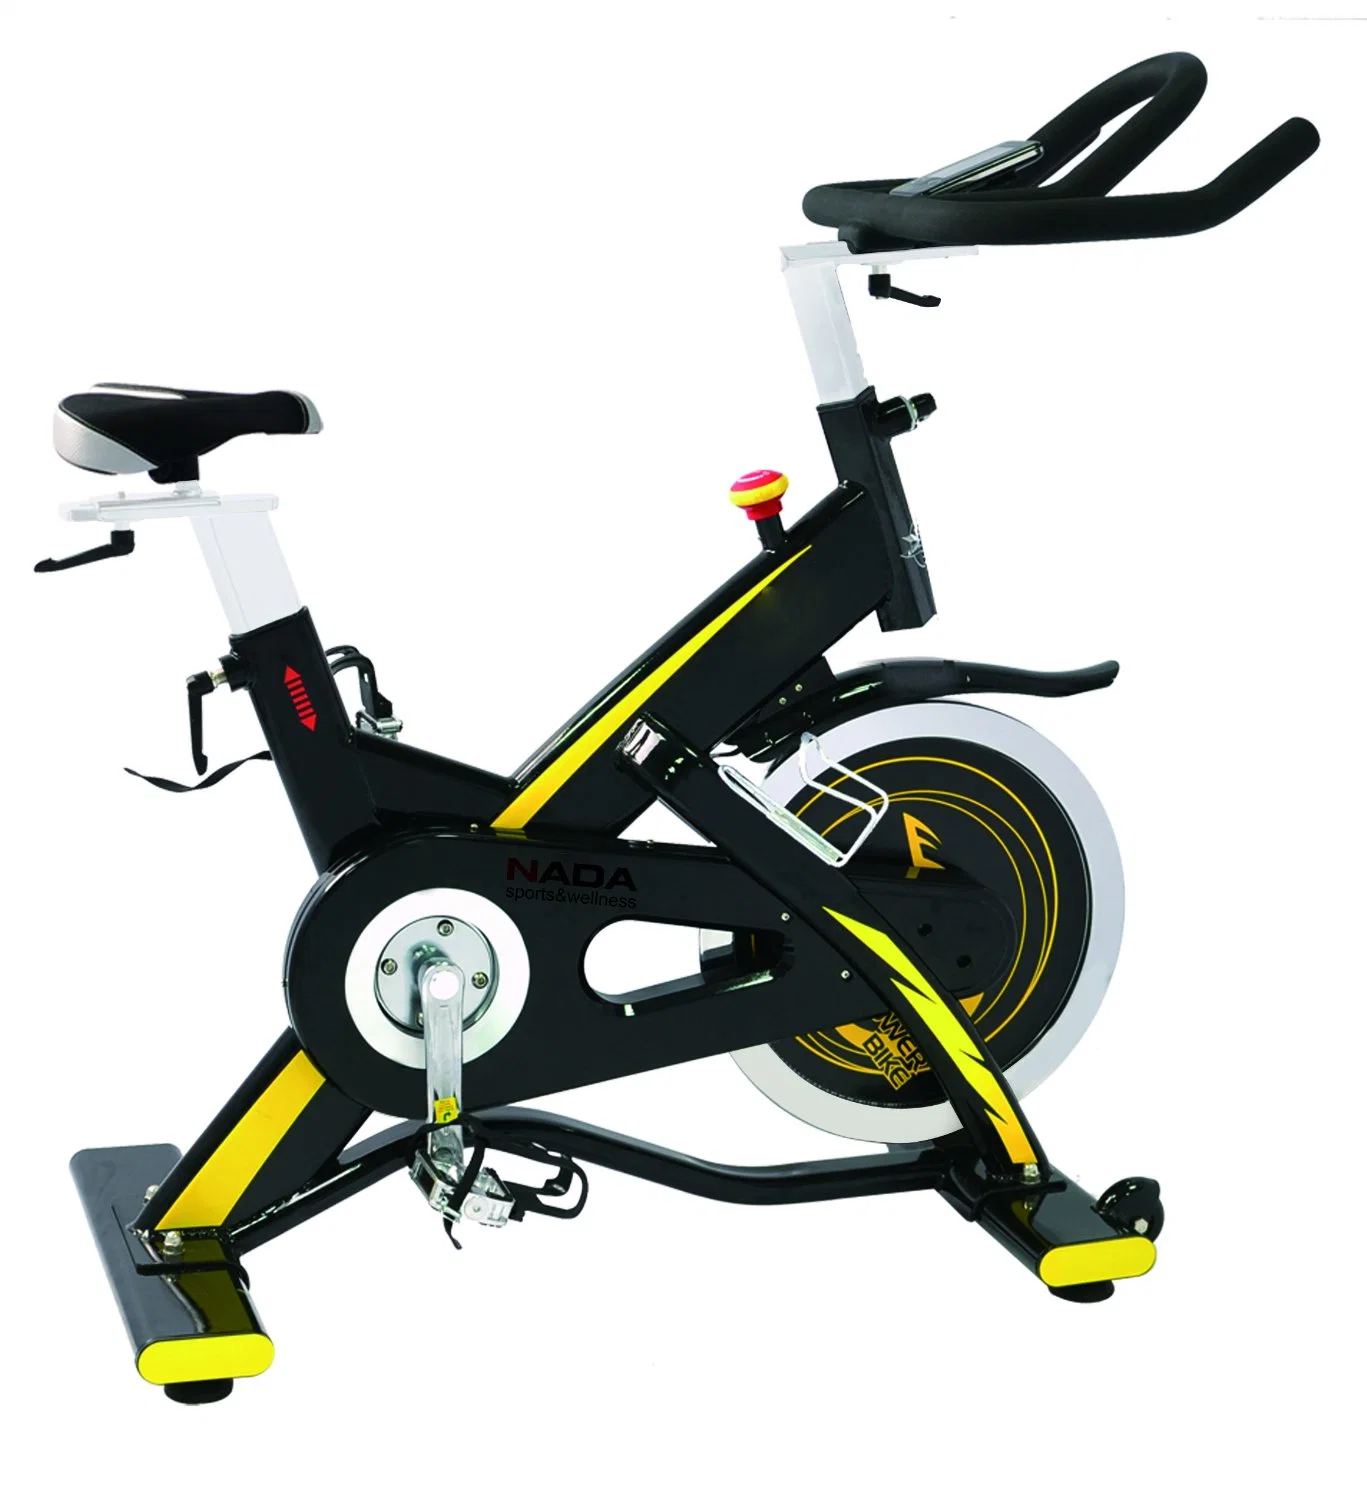 Commercial/ Gym Machines/ Spinning Bike/ Nada Sports/Indoor Cycling/ Exercise Bike/Fitness Bike/Gym Equipment/ Home Gym/ Spinning Bike